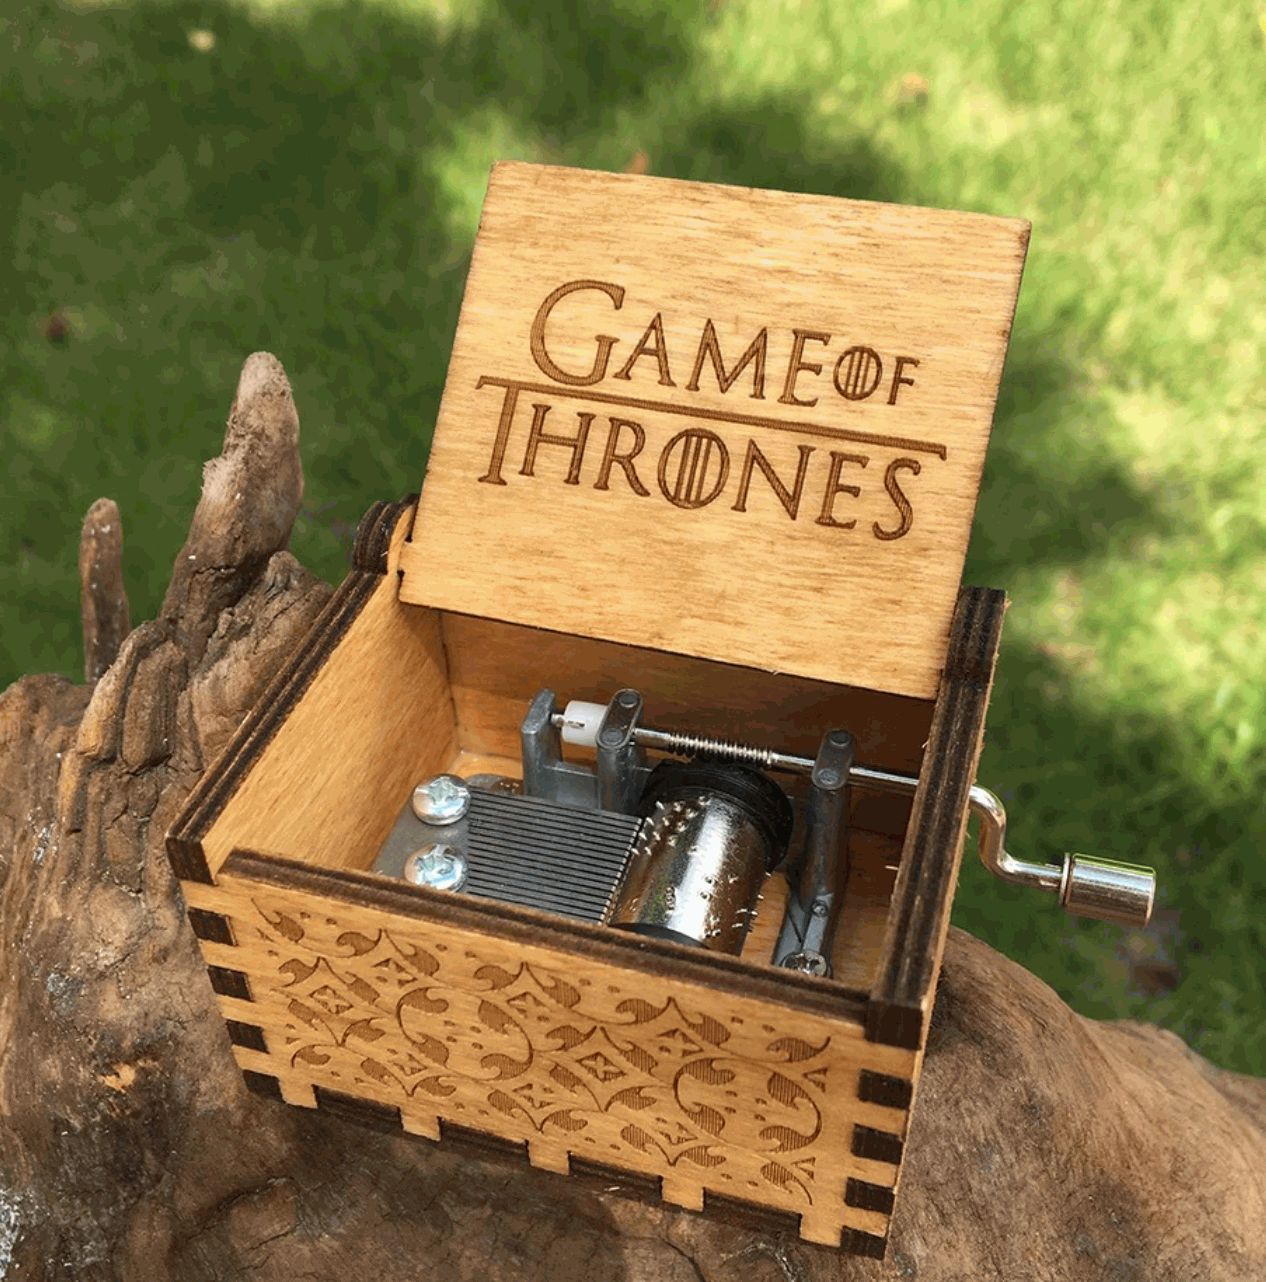 Wooden Music Box Game of Thrones Star Wars Engraved Toy Kid Gift Hand Crank Xmas